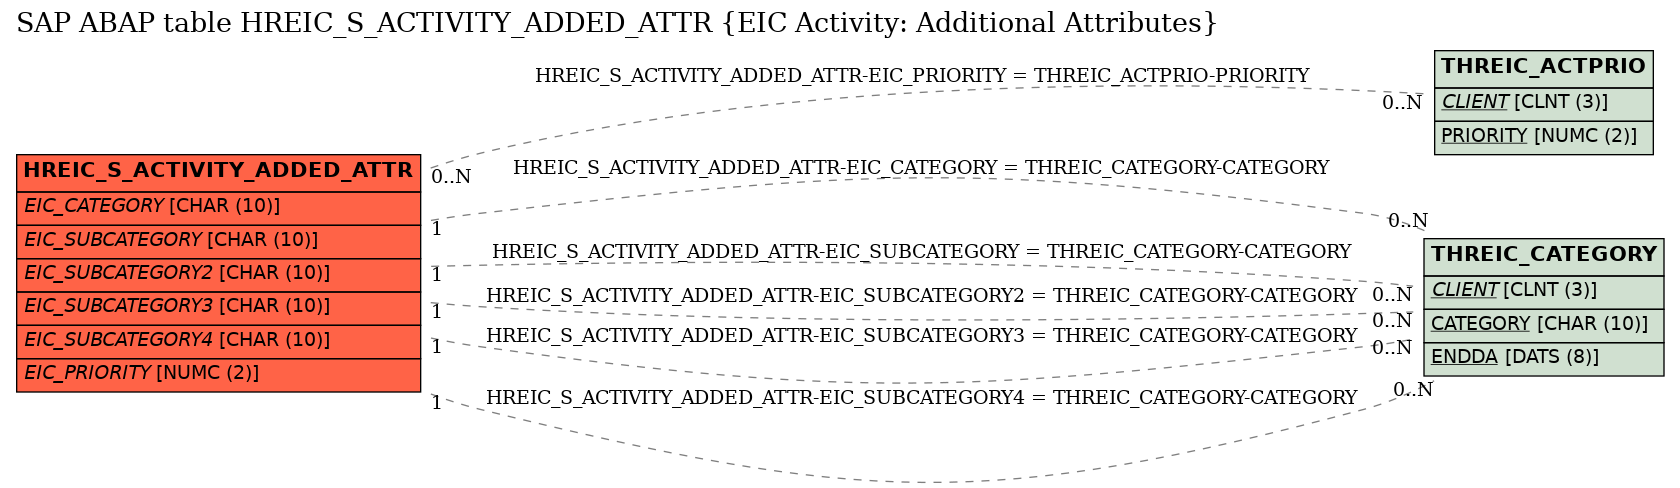 E-R Diagram for table HREIC_S_ACTIVITY_ADDED_ATTR (EIC Activity: Additional Attributes)